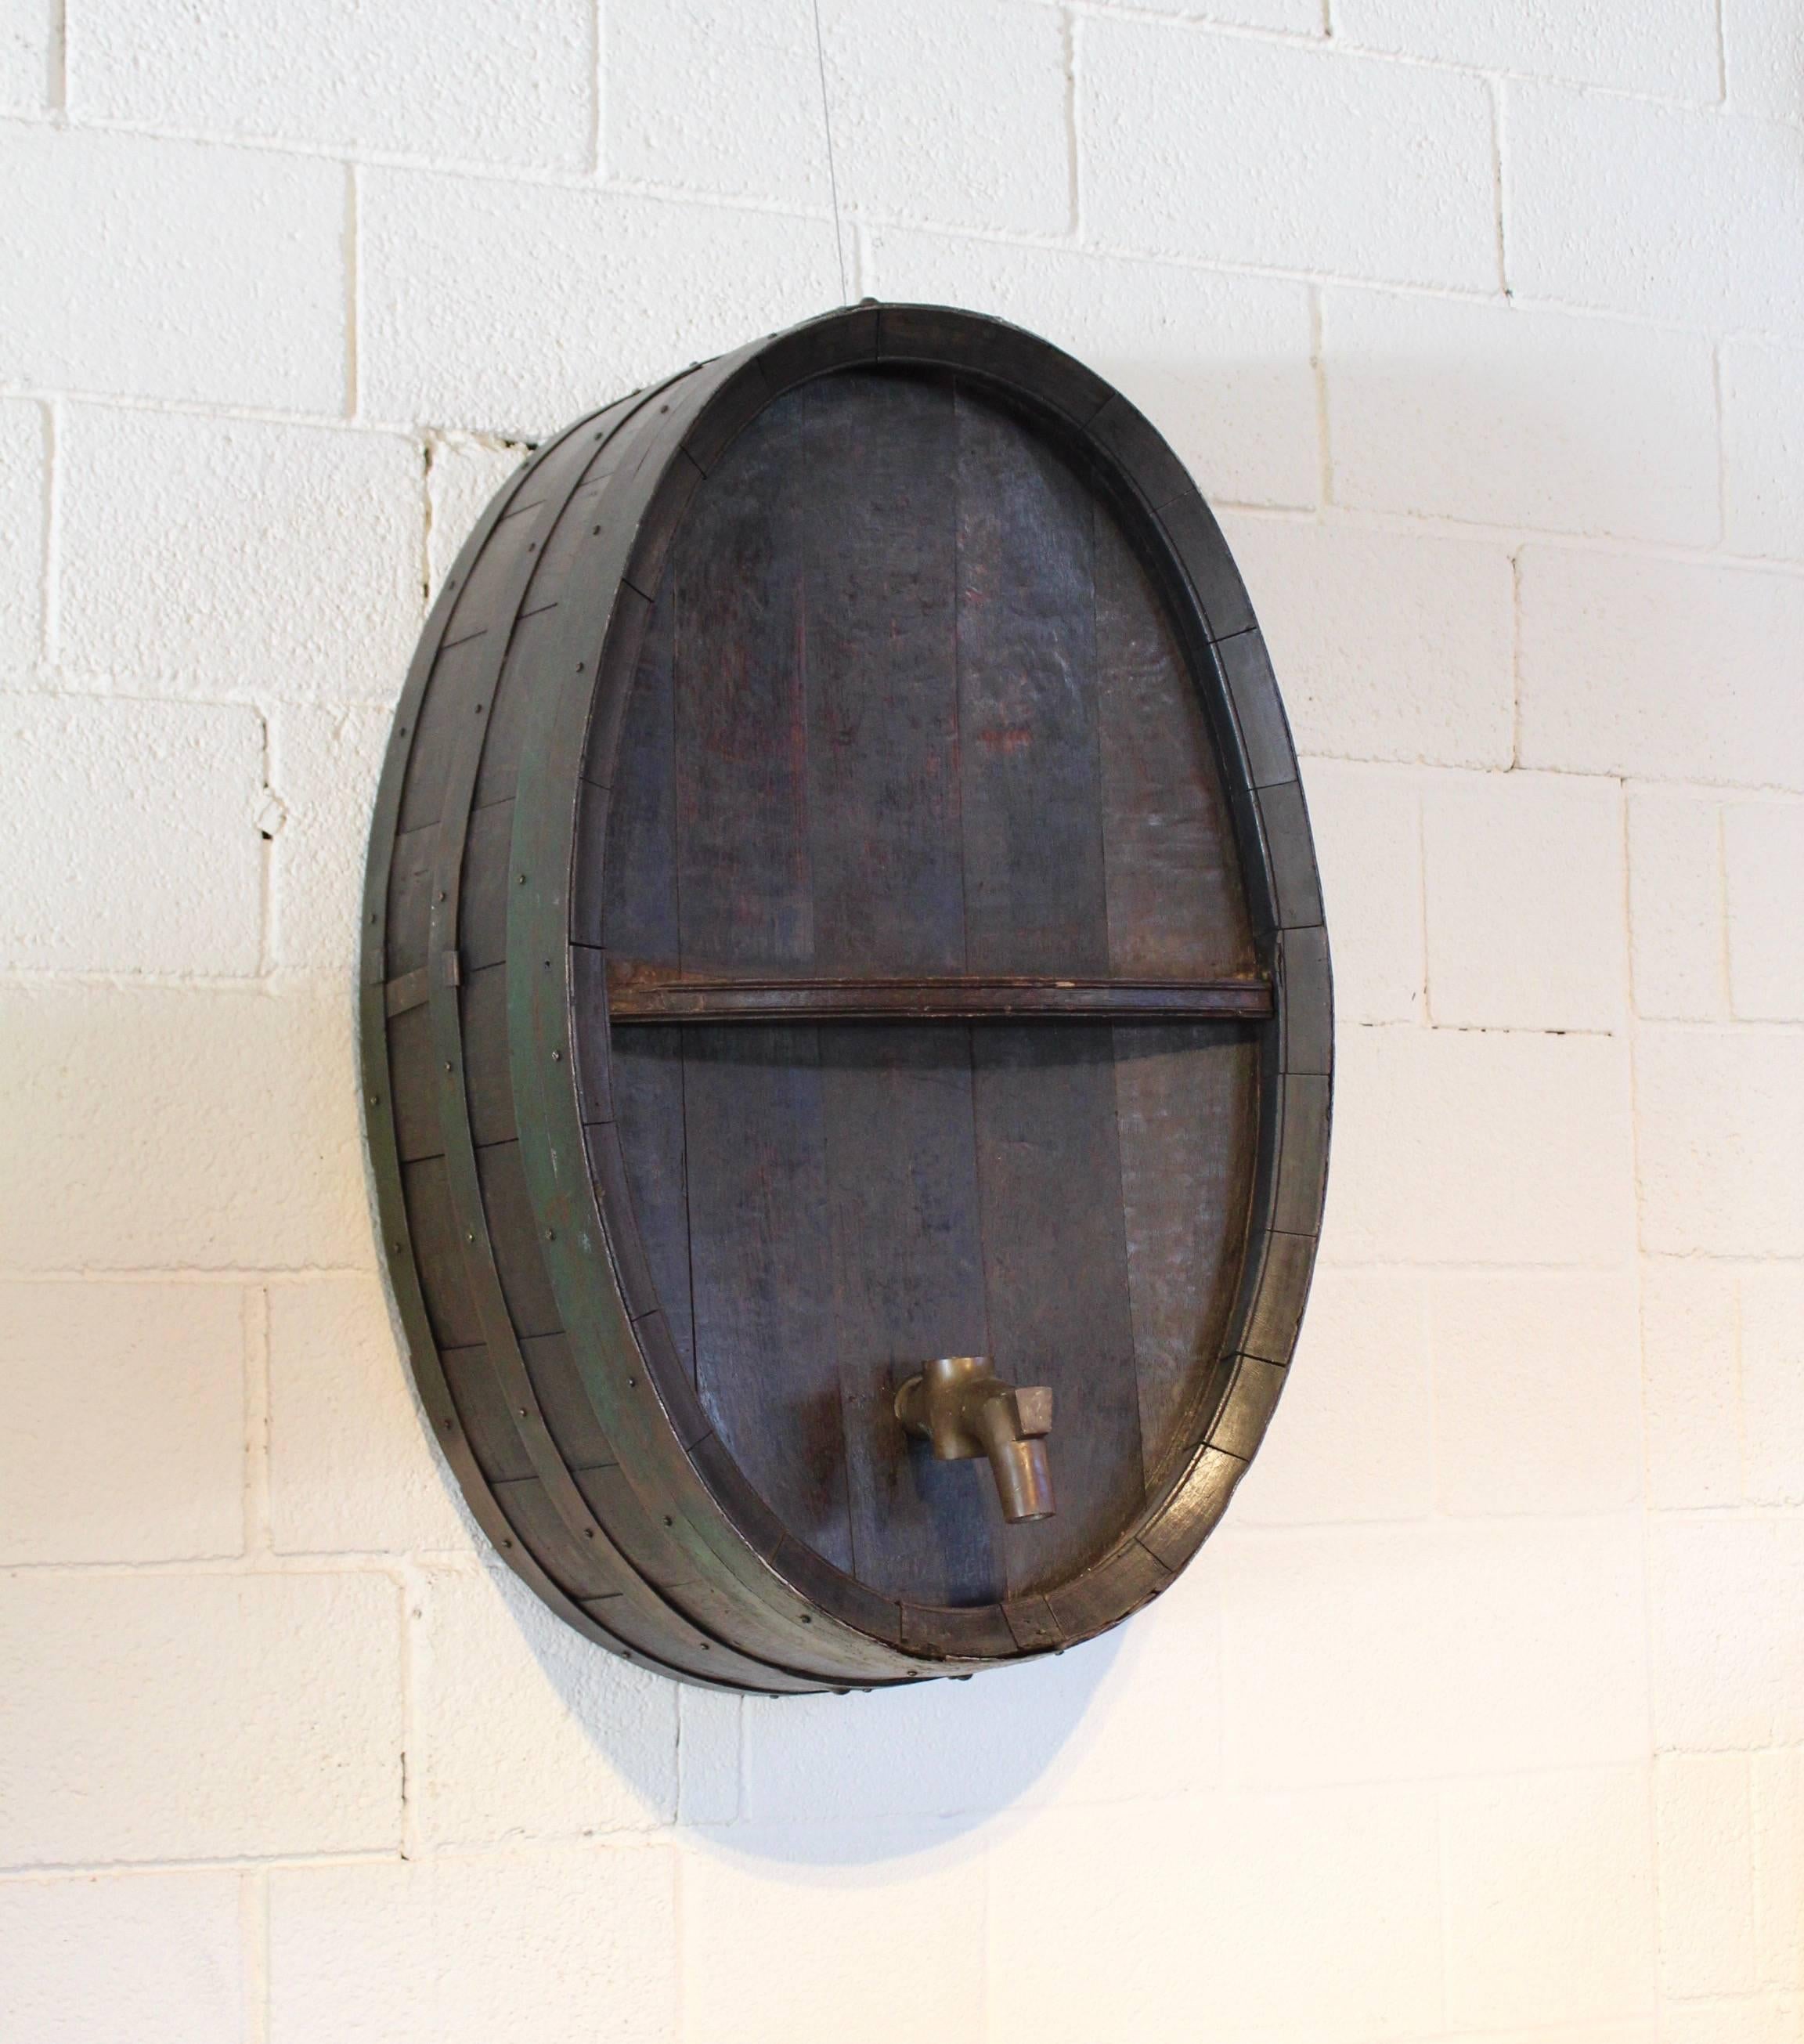 Antique Frenchiron banded green wine barrel as wall decor, circa 1900.
Primitive, iron banded with original green patina wine barrel as wall decor.
Wine barrel comes with brass spout.
Dark wood antique brown natural patina. 
Wine cask face is